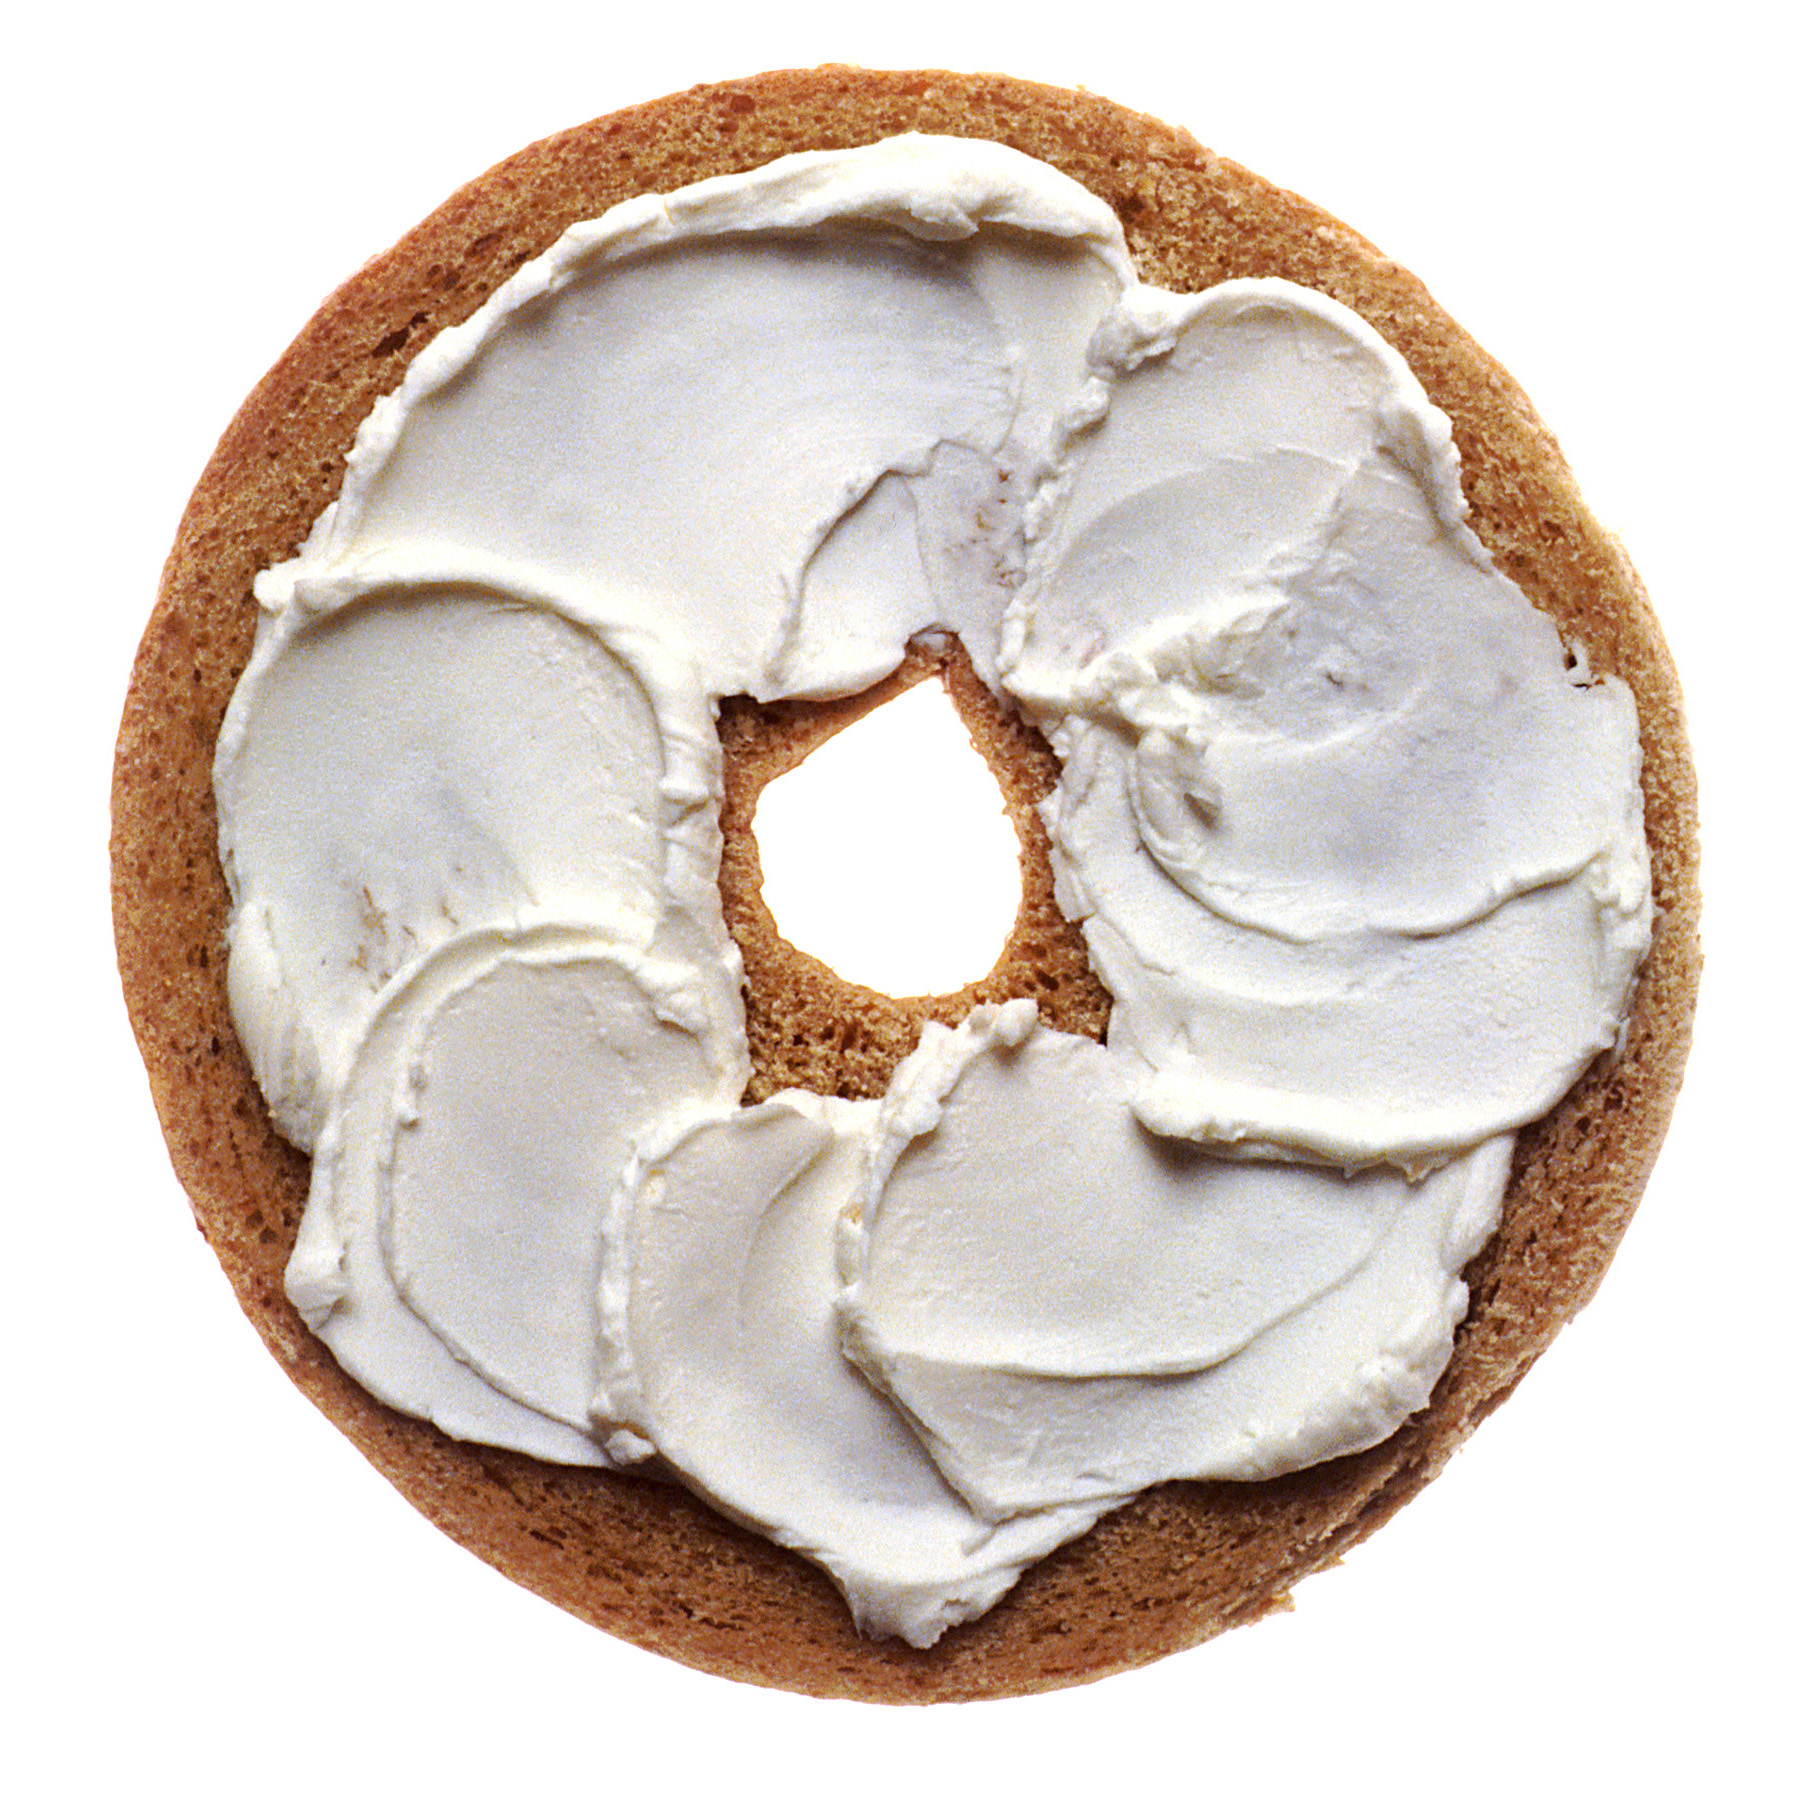 Bagel And Cream Cheese PNG - 140515